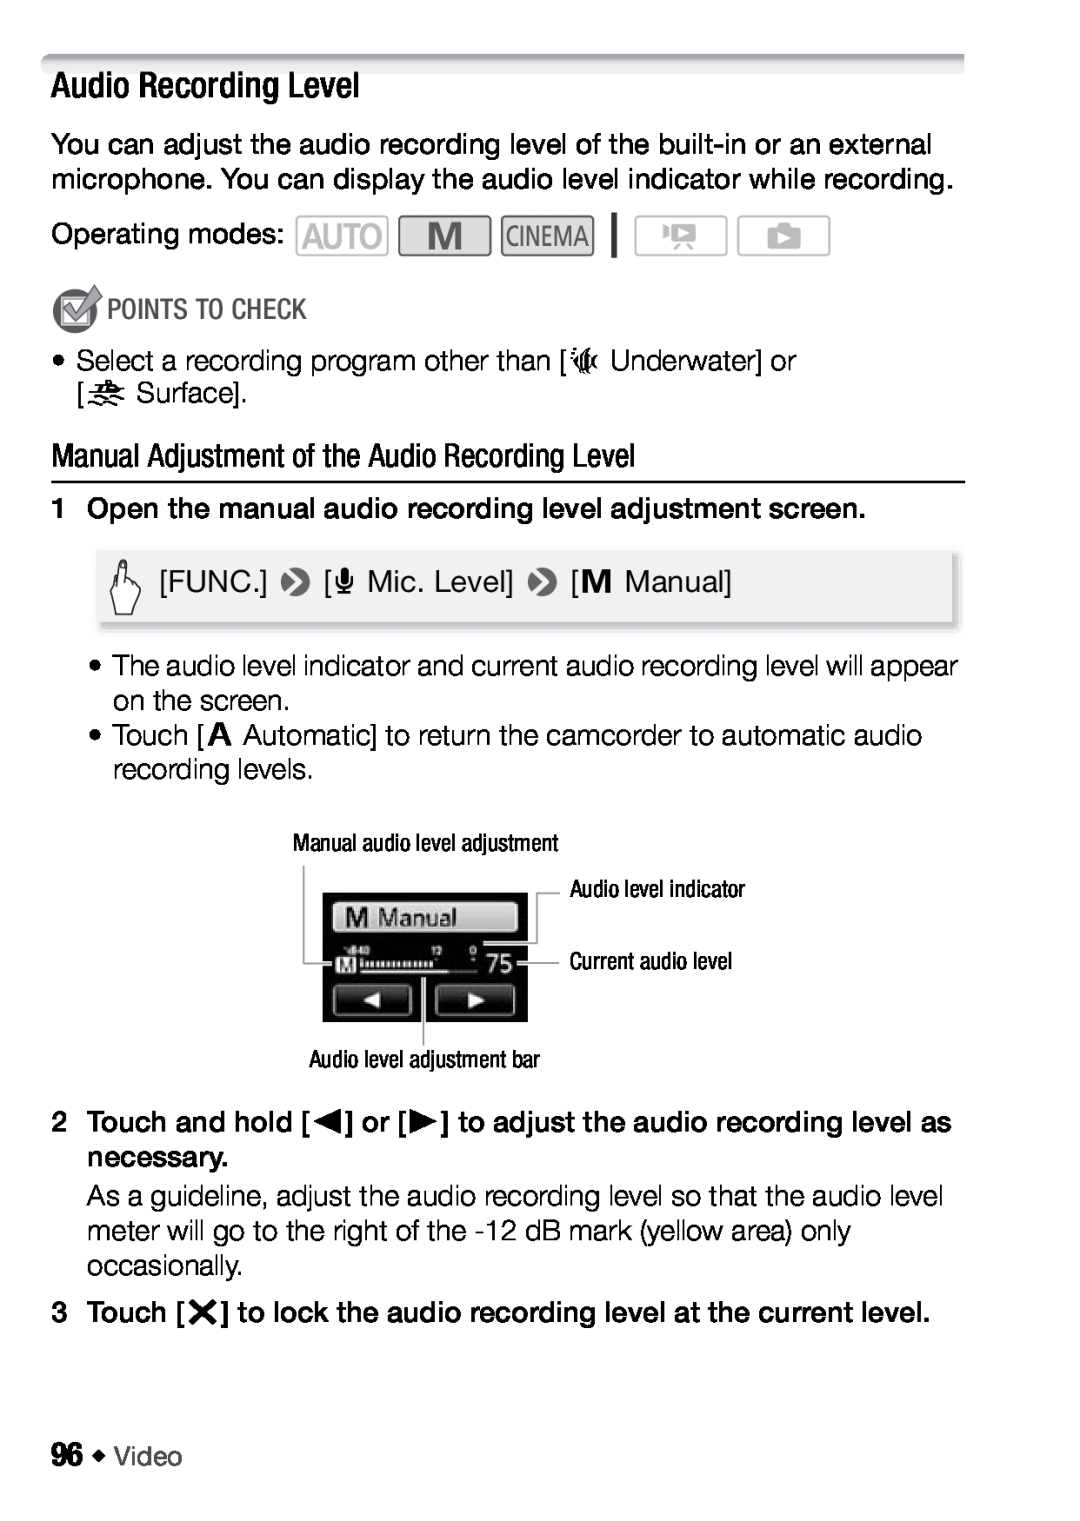 Canon HFM406, HFM46 instruction manual Manual Adjustment of the Audio Recording Level, Points To Check 